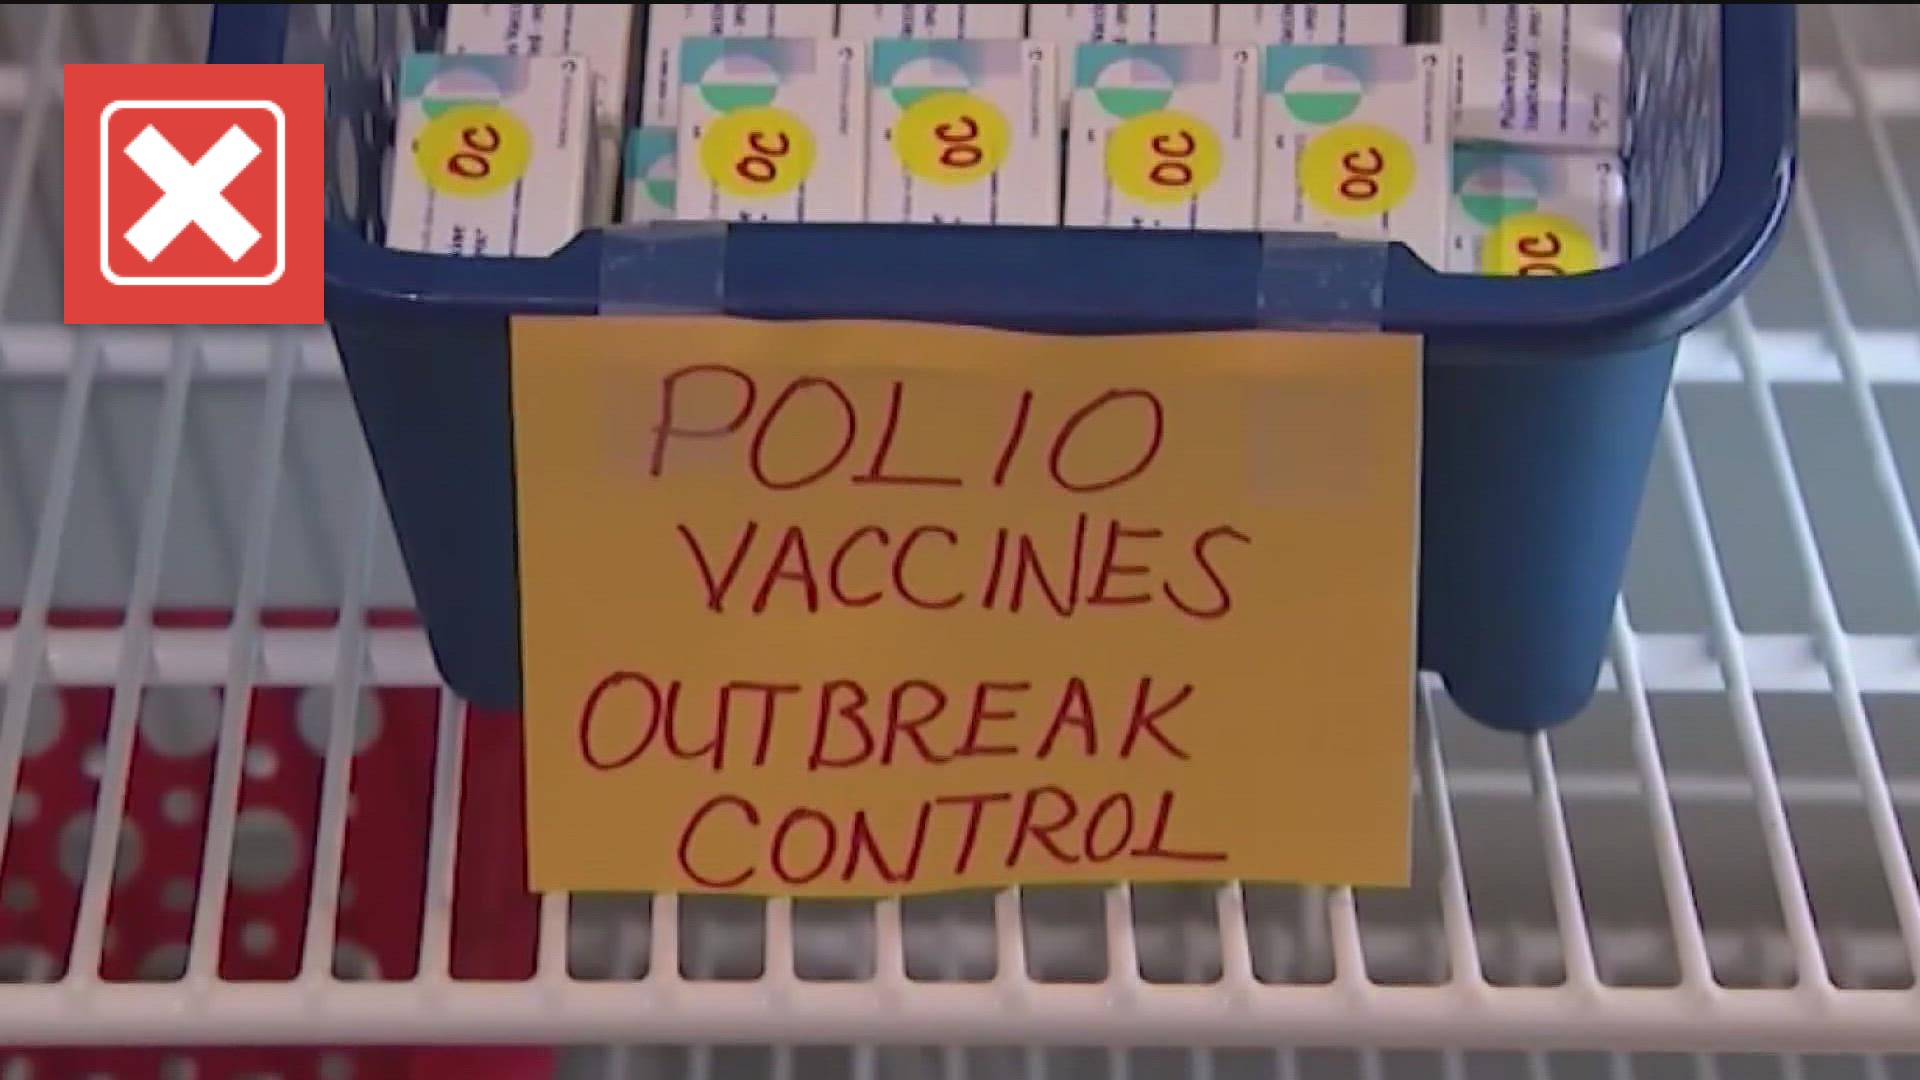 An unvaccinated man in New York was recently diagnosed with polio, making it the first confirmed case in the United States since 2013.